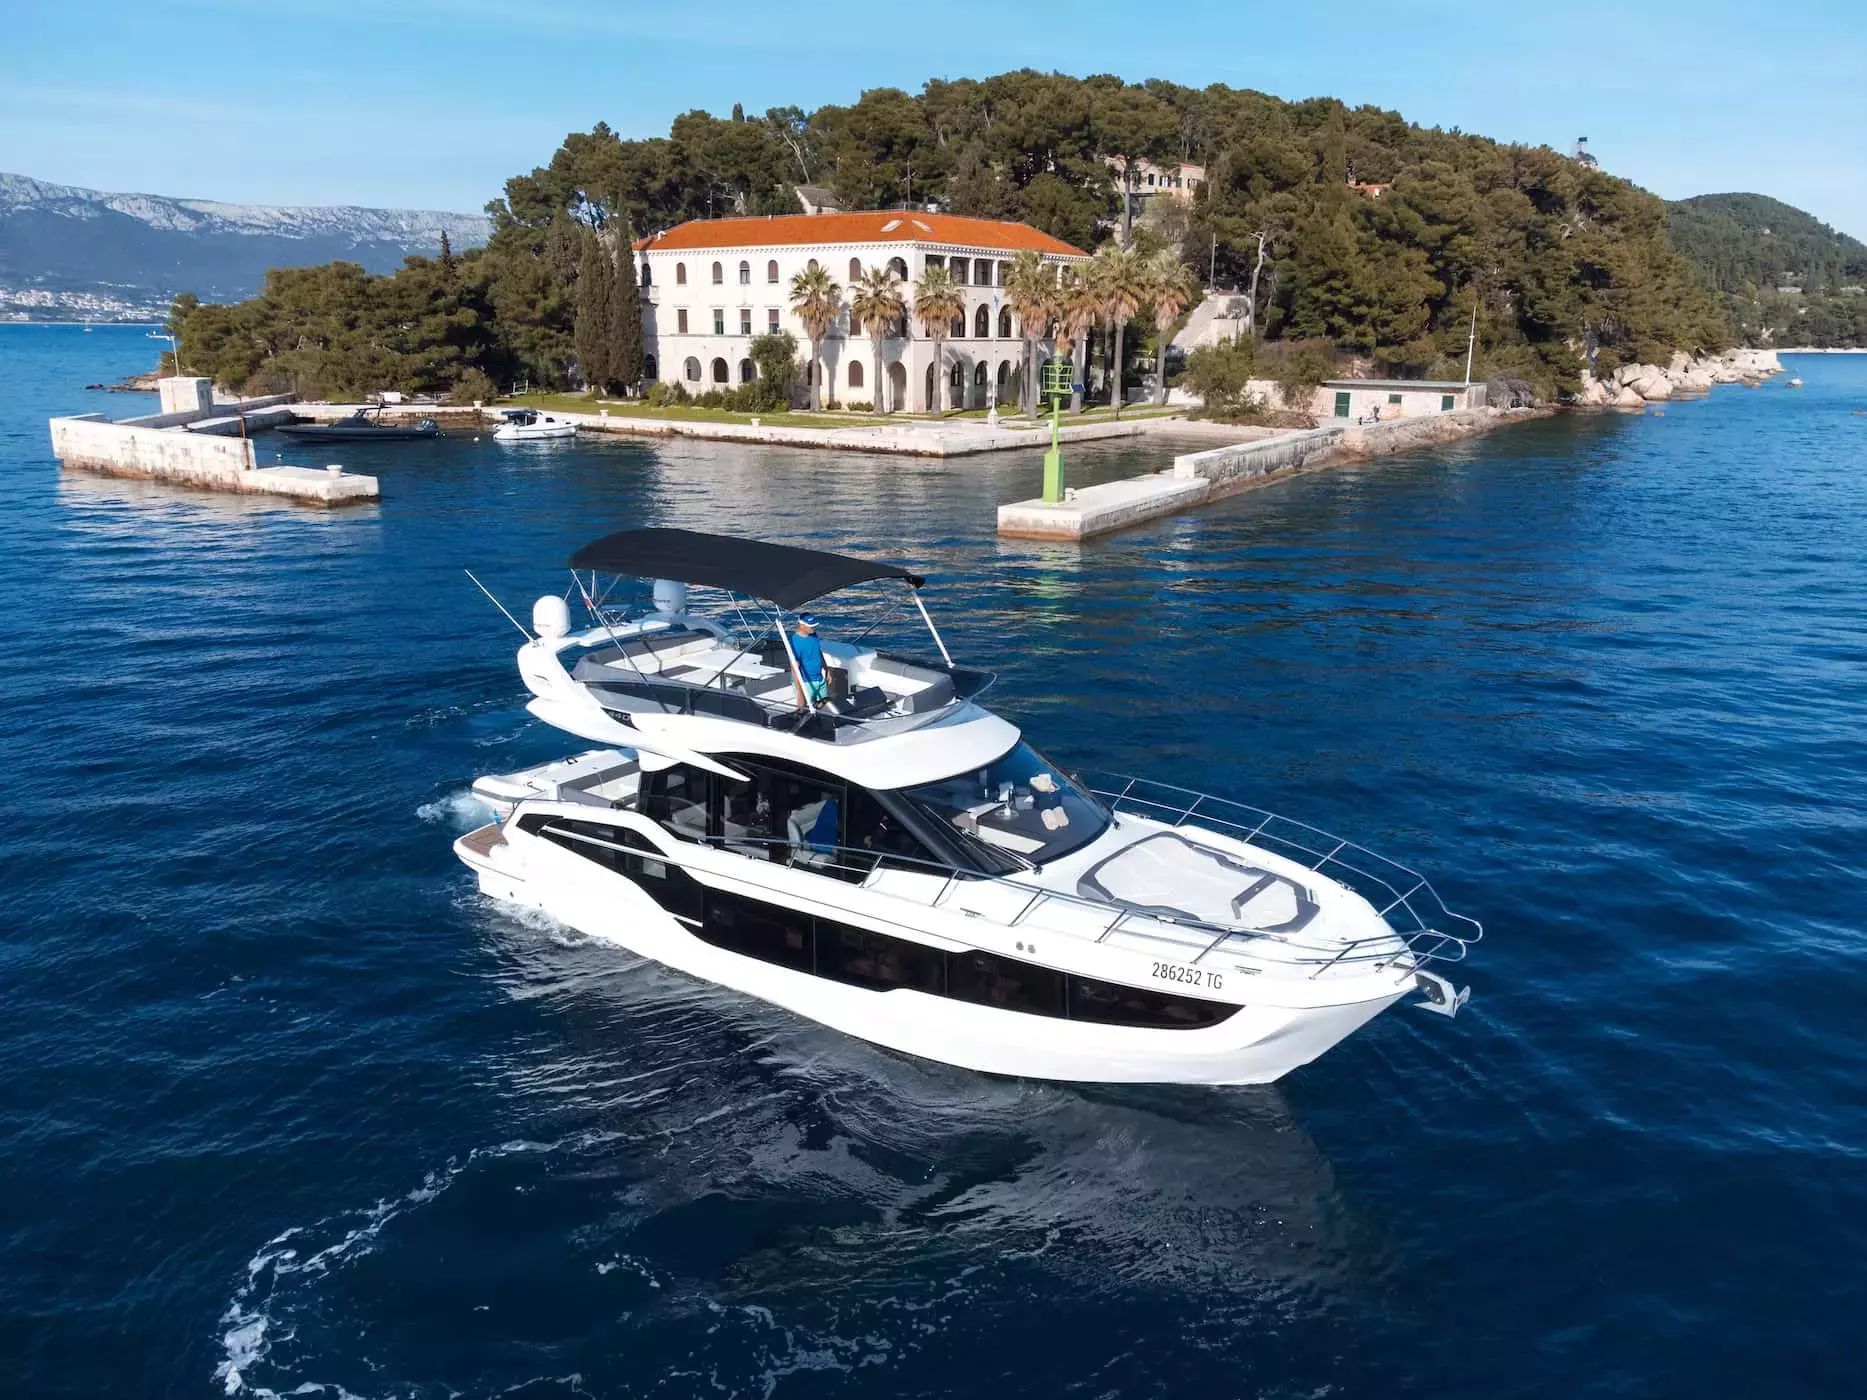 FG Star mini by Galeon - Top rates for a Charter of a private Motor Yacht in Montenegro